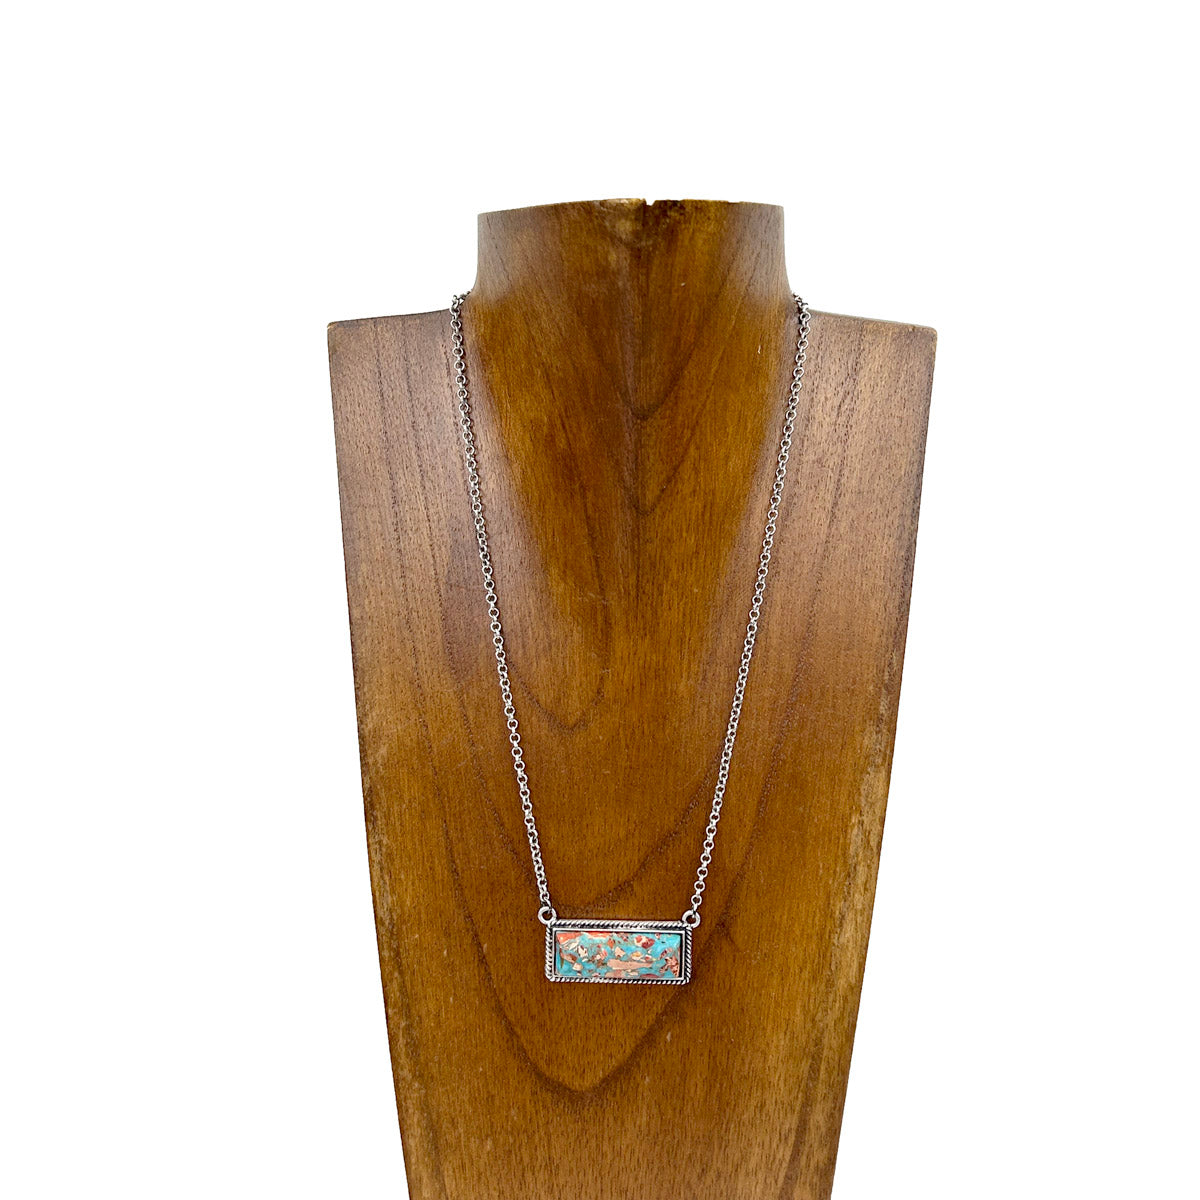 NKY230530-01-A           "Silver metal chain with oyster copper turquoise  triangle pendant Necklace"